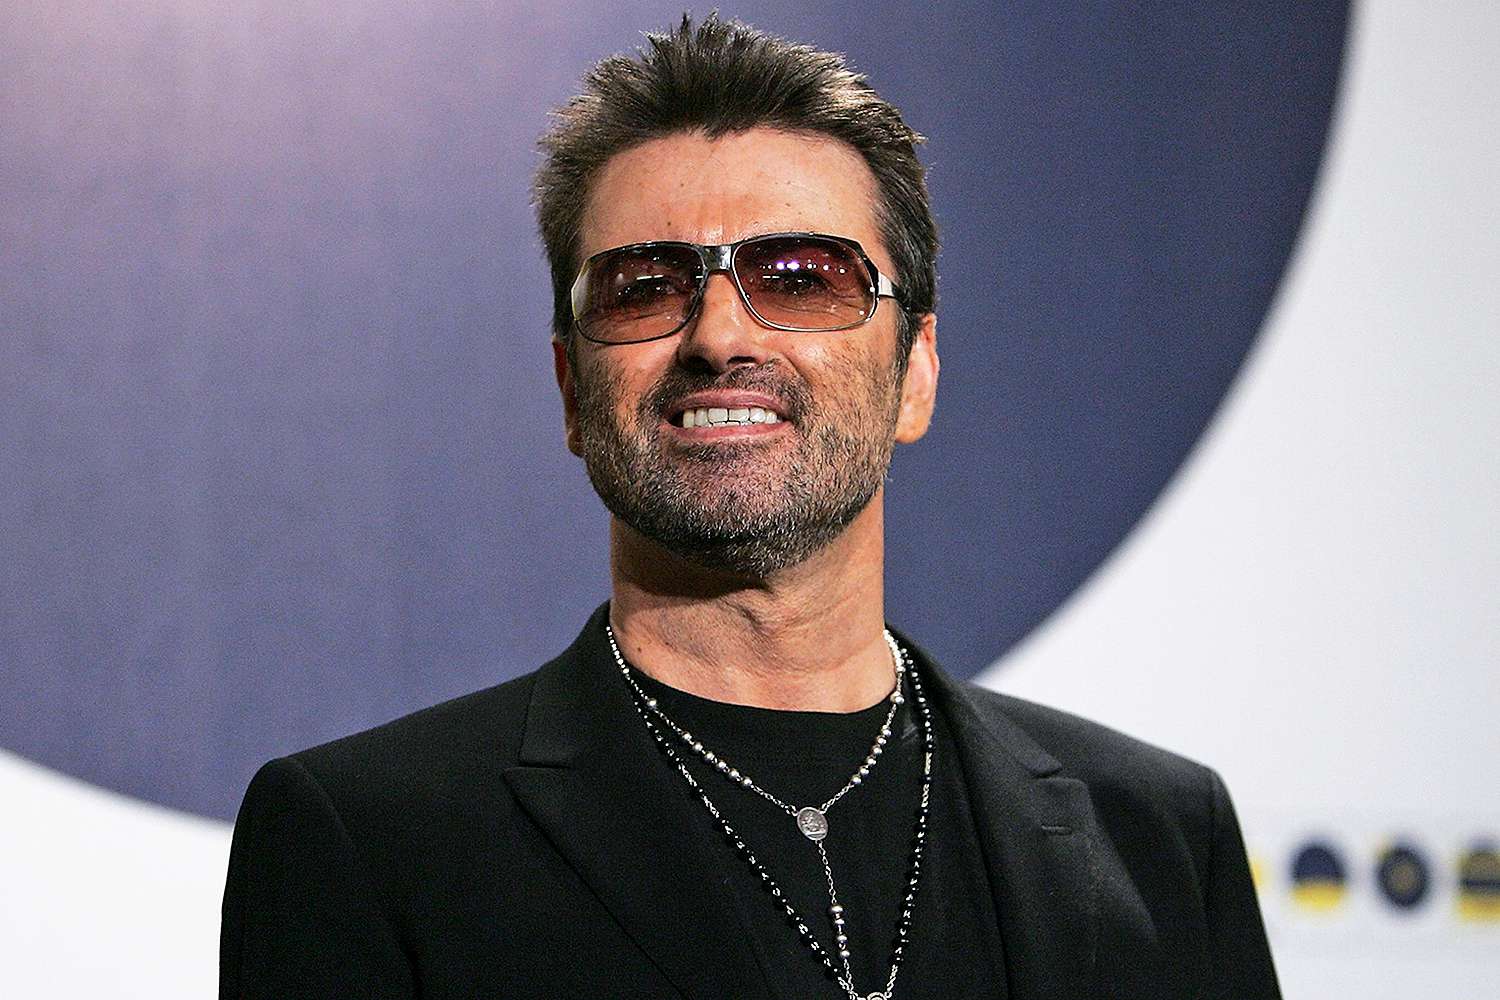 taille-george-michael-Image